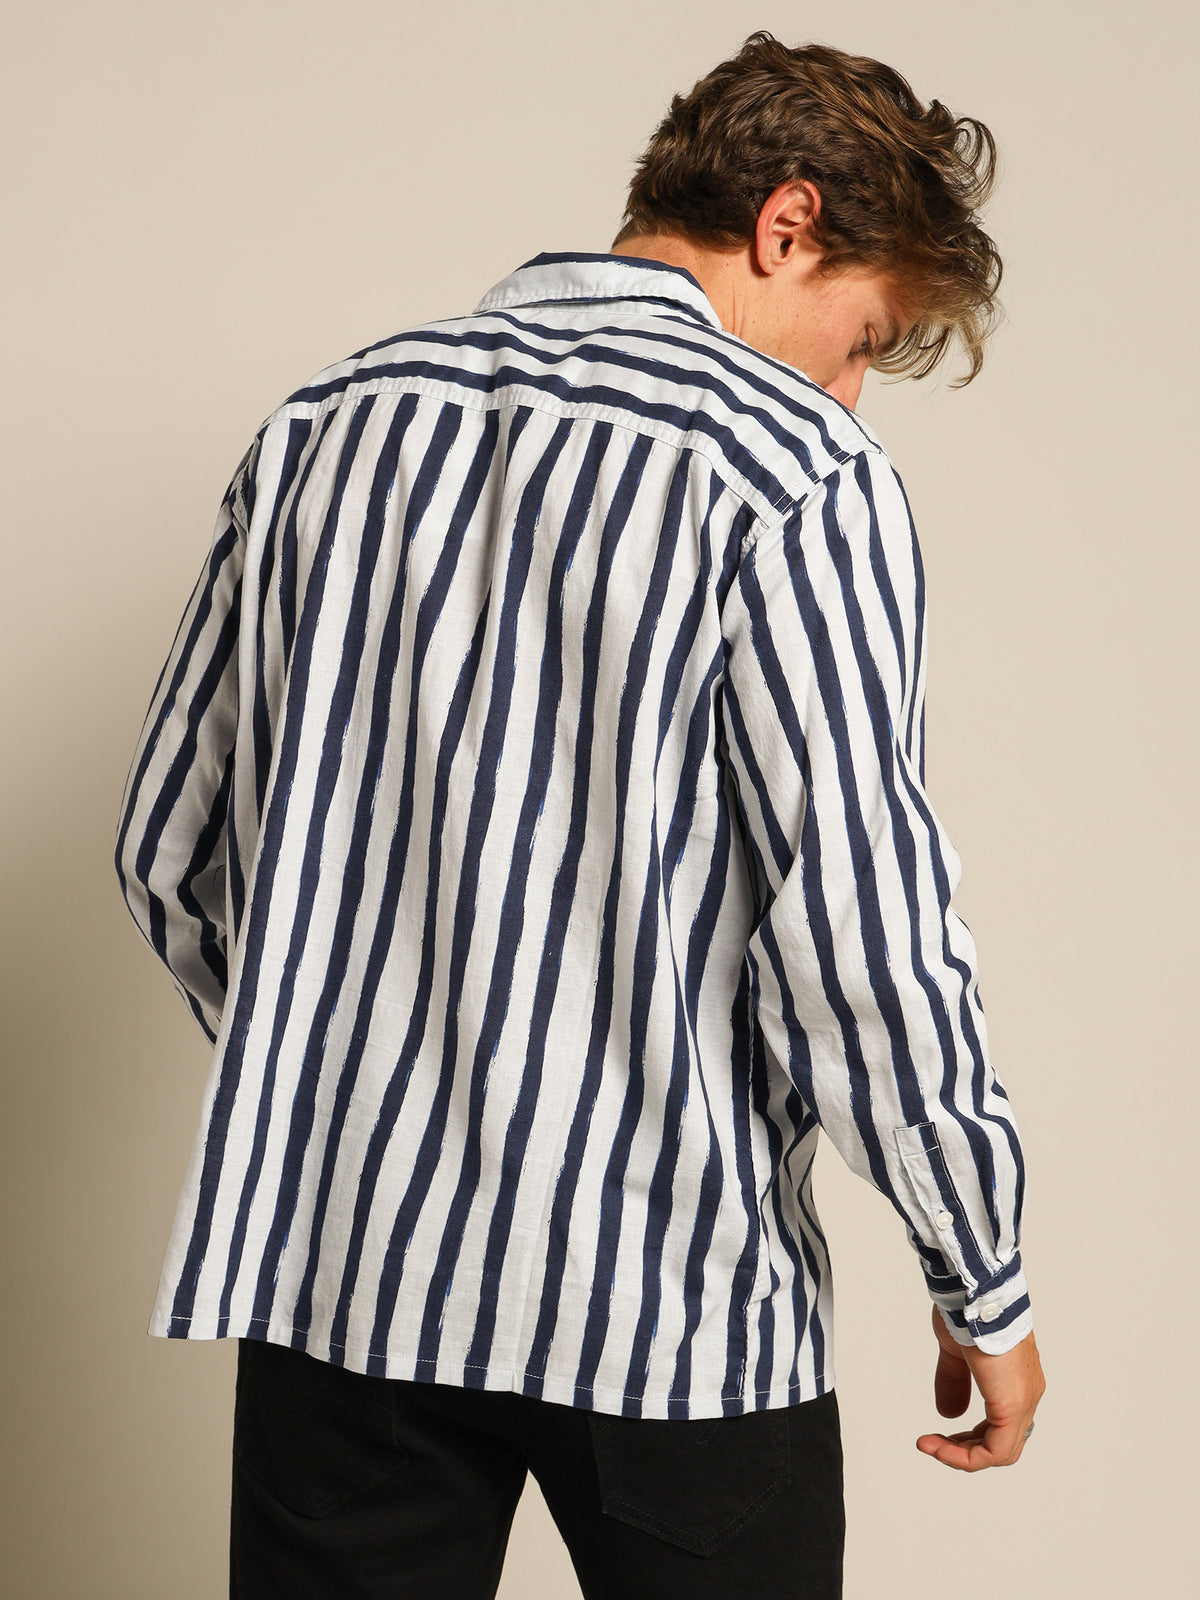 Utility Worker Shirt in Blue Painted Stripes